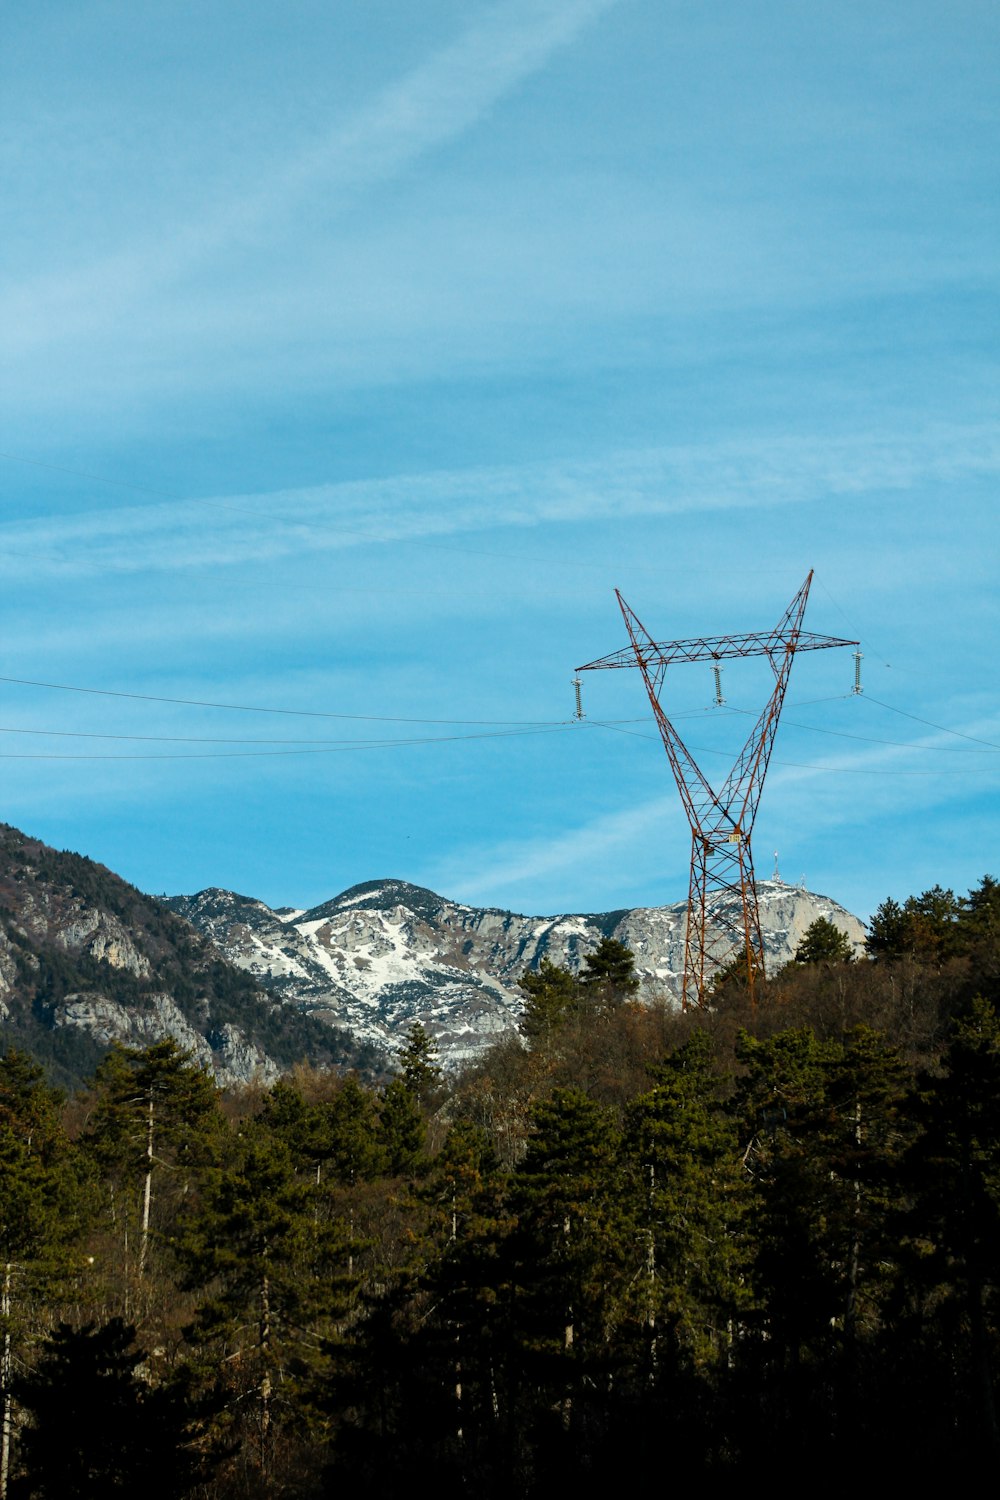 a power line in the middle of a forest with mountains in the background